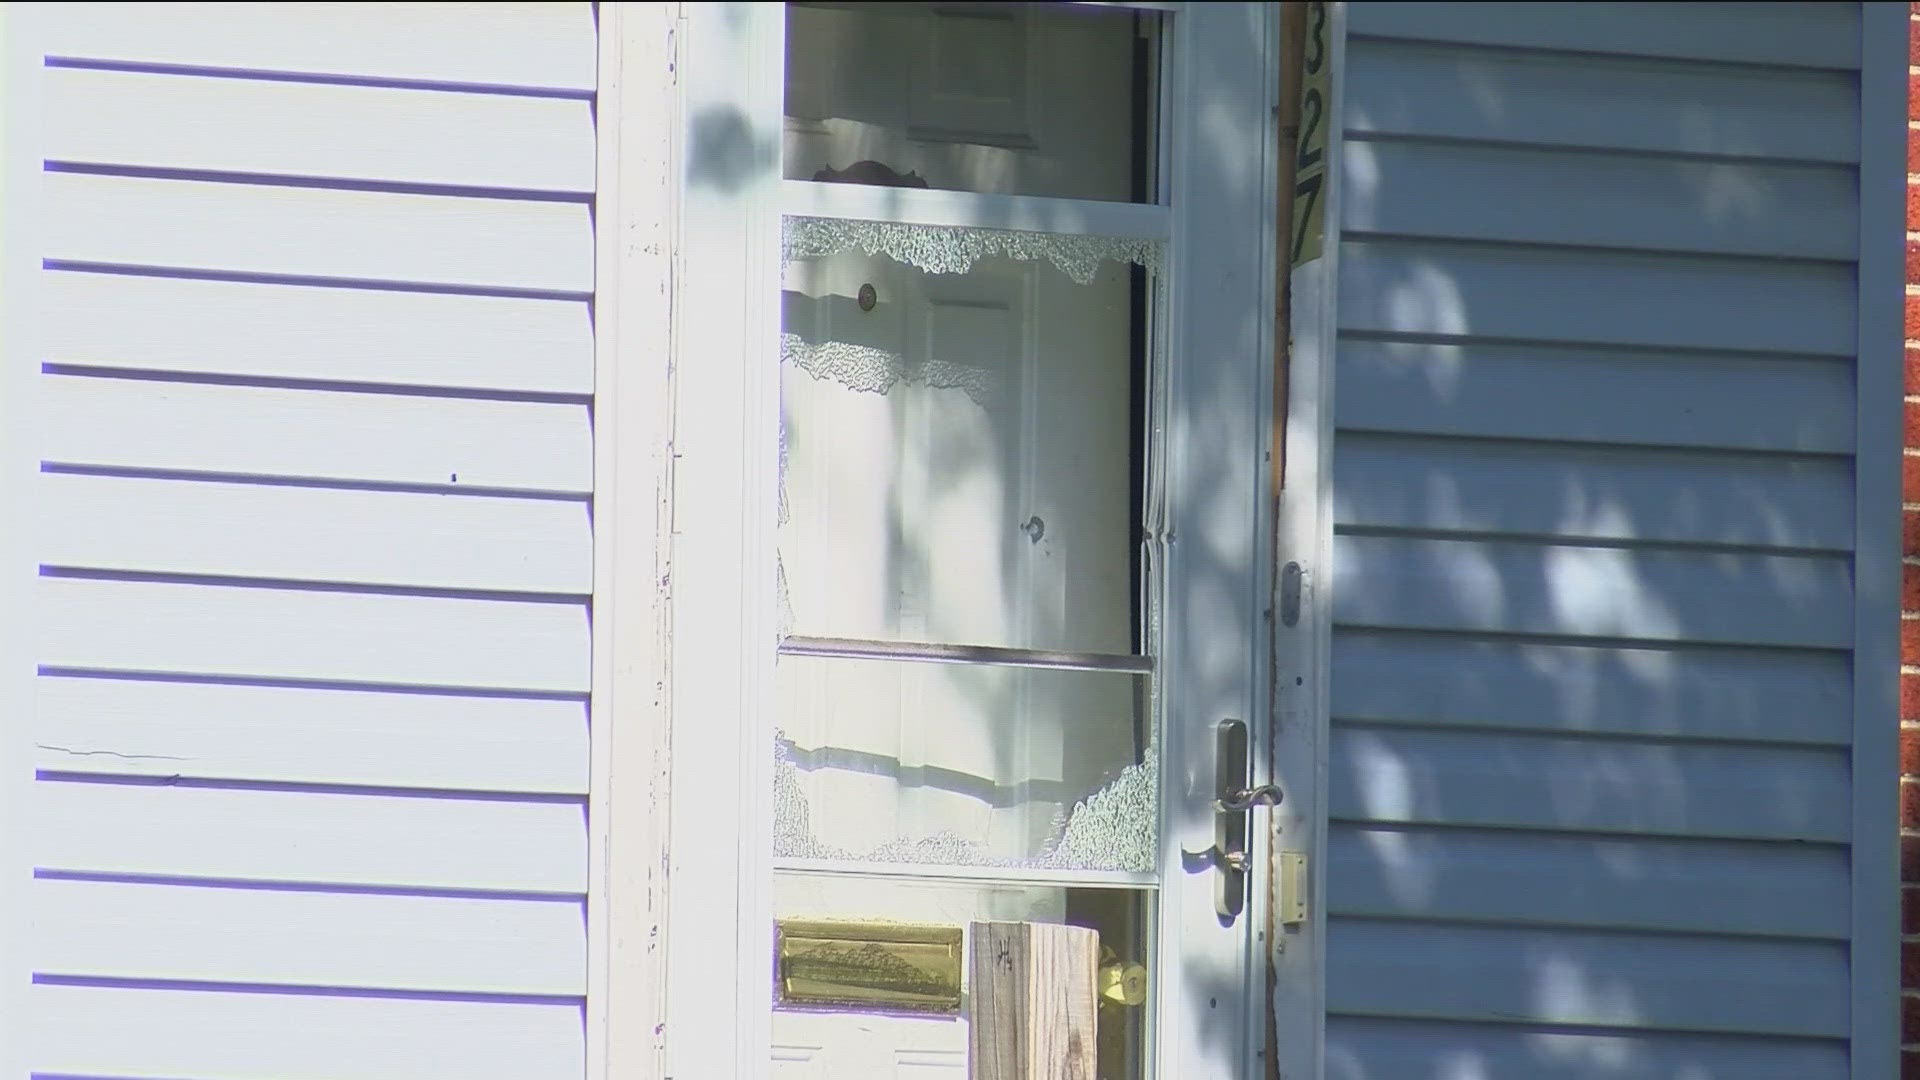 Police said the west Toledo home was hit by several bullets after a drive-by shooting around 9 a.m.